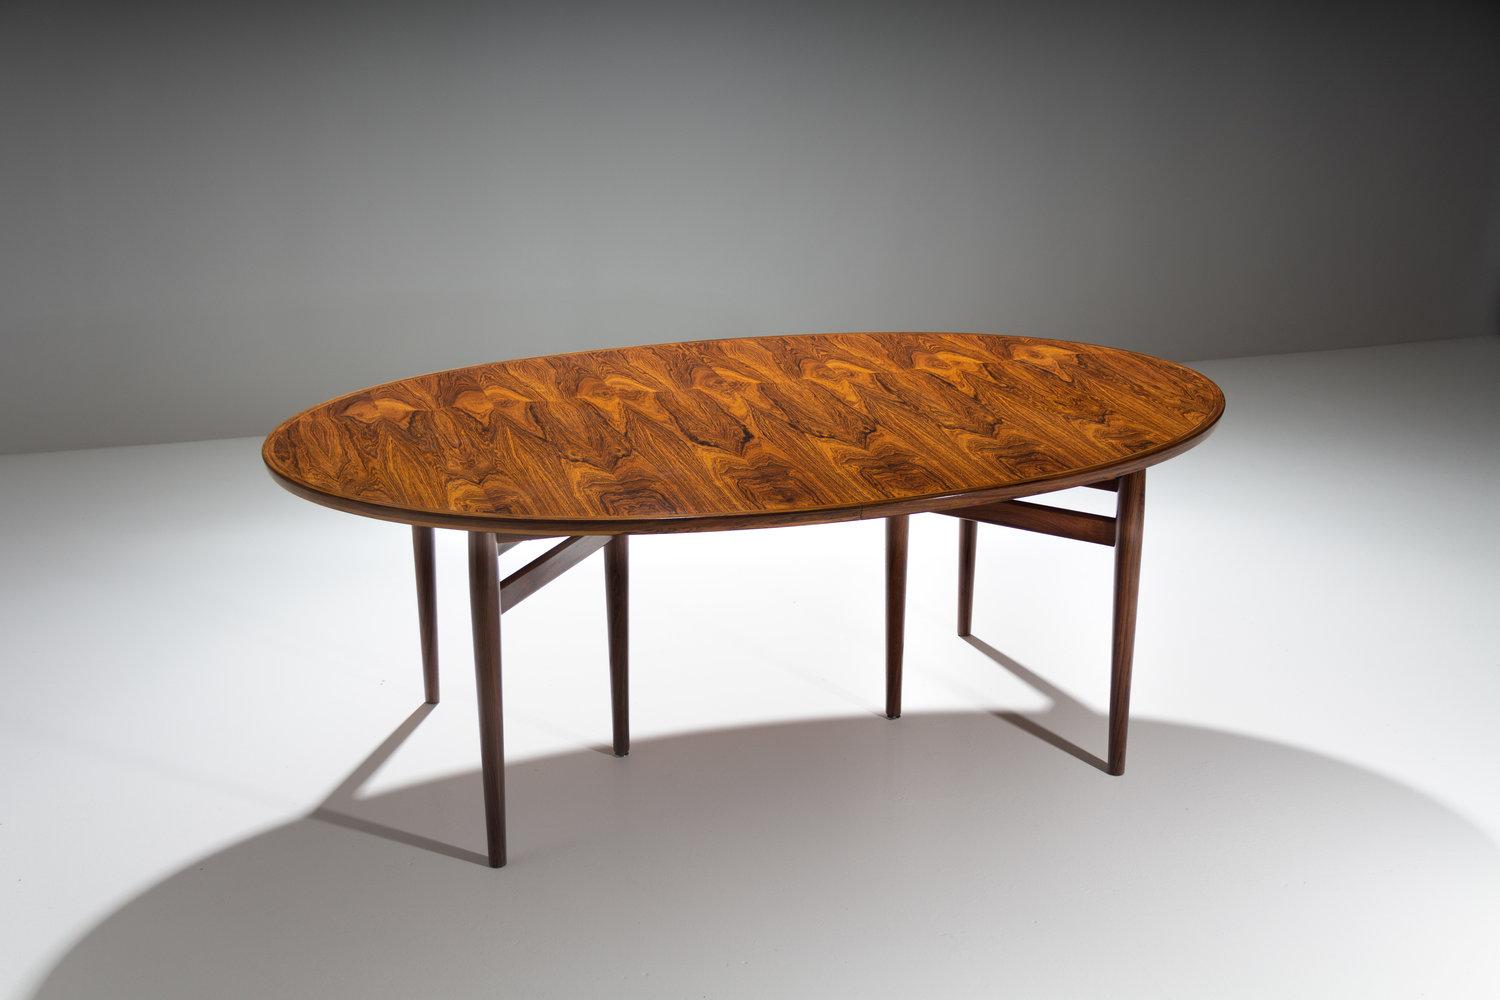 Arne Vodder oval rosewood dining table model 212 with two extension leaves. Manufactured by Sibast Furniture 1960s.

This oval table is executed in solid and veneer rosewood and has aged beautifully. Due to time and sunlight especially the